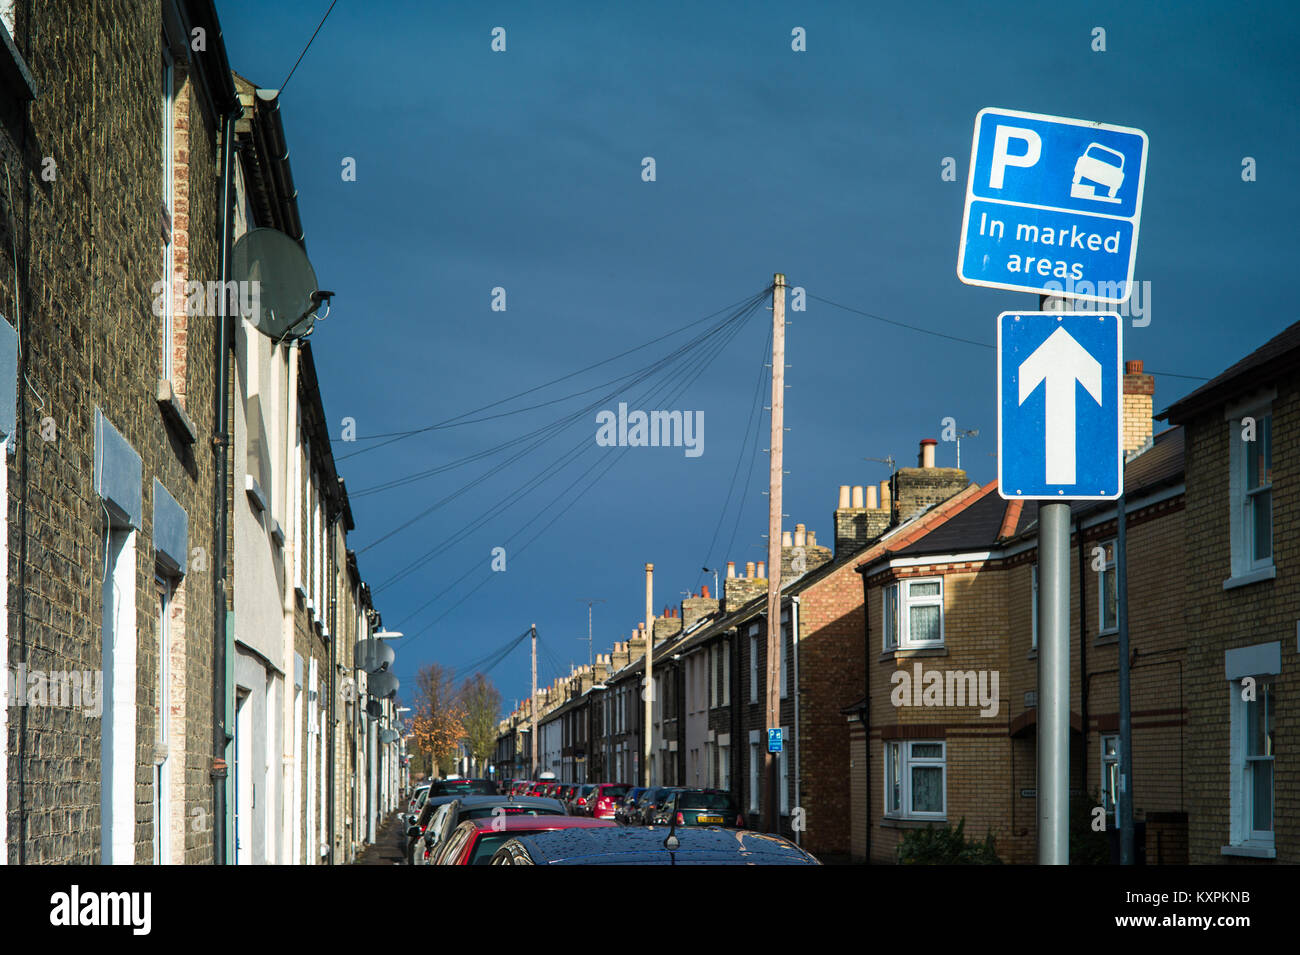 On Street Parking - parking on kerb allowed in marked areas in Cambridge UK Stock Photo